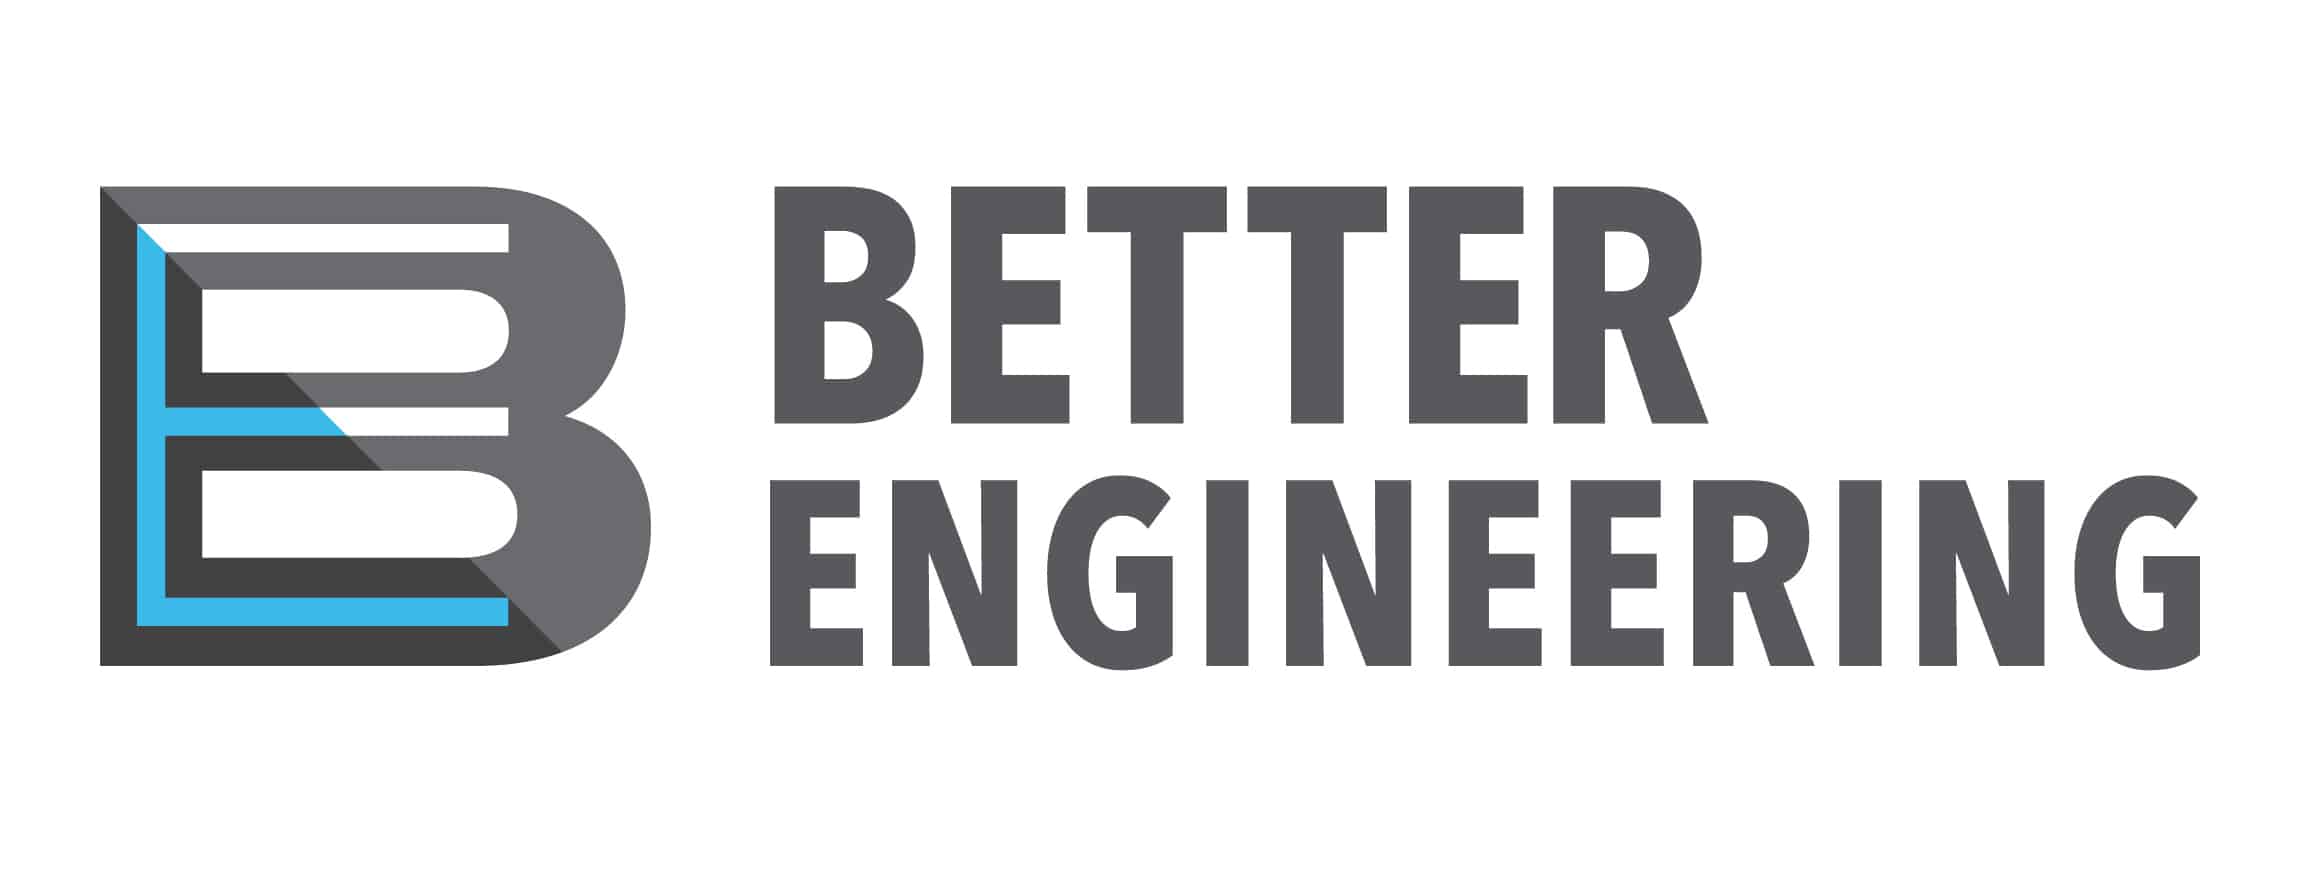 Better Engineering Grey and Blue Logo